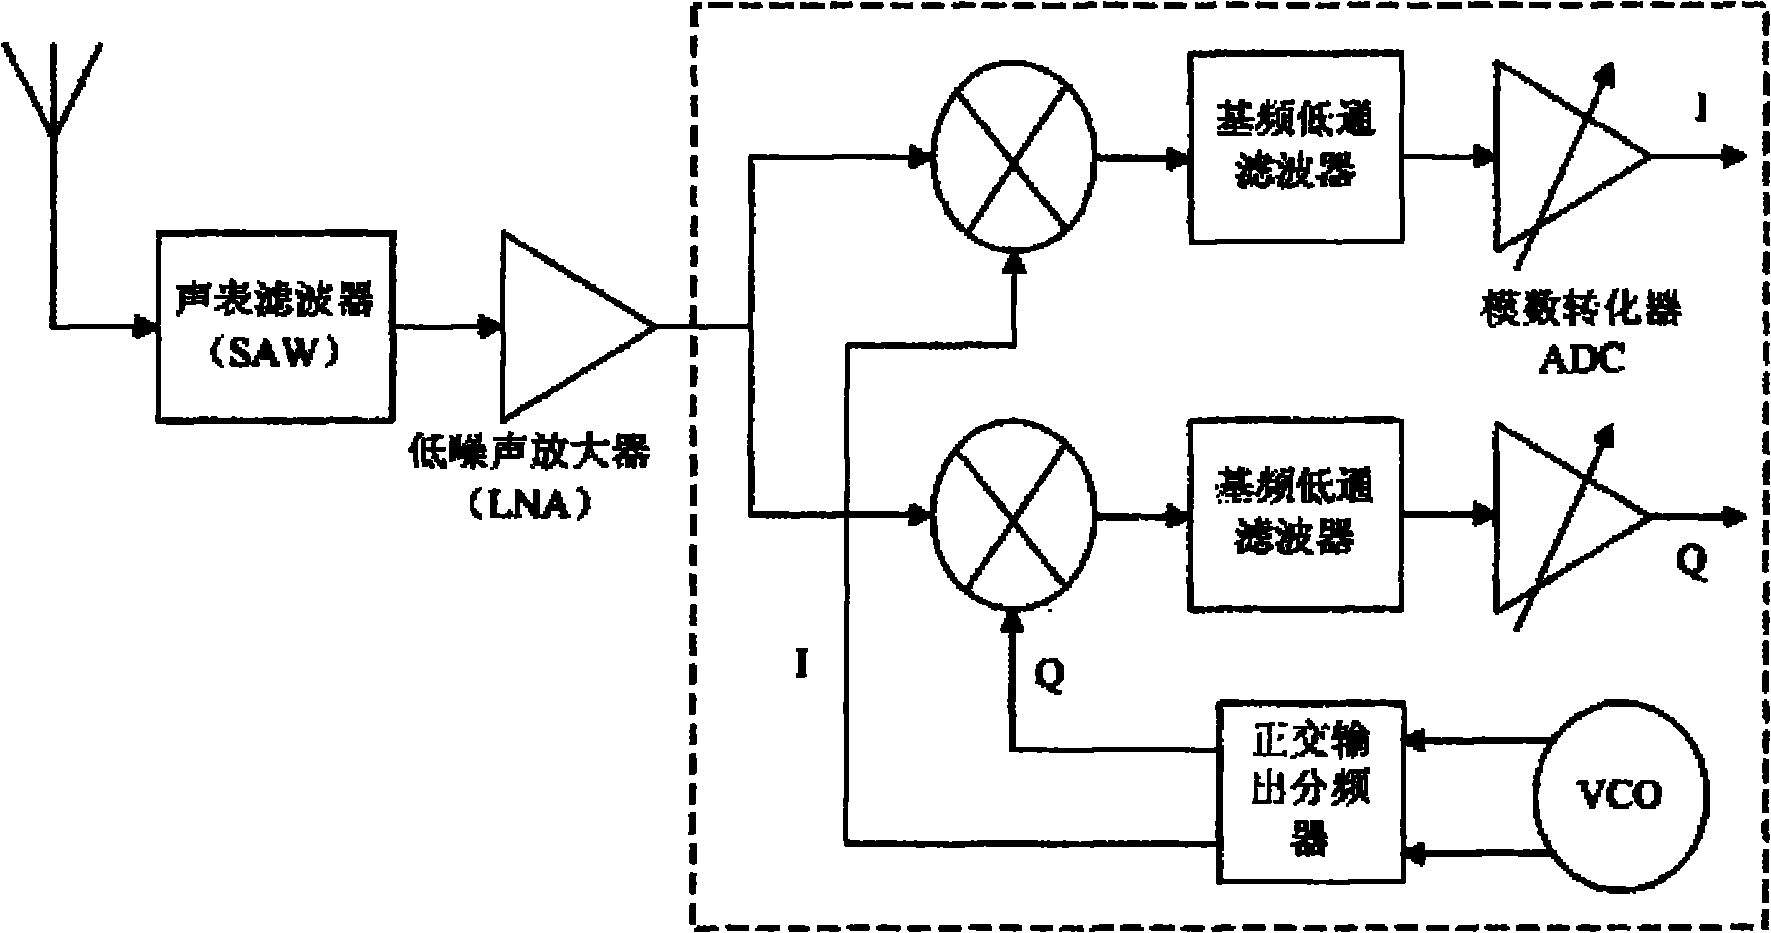 Signal frequency-mixing method based on passive mixer and zero intermediate frequency receiver